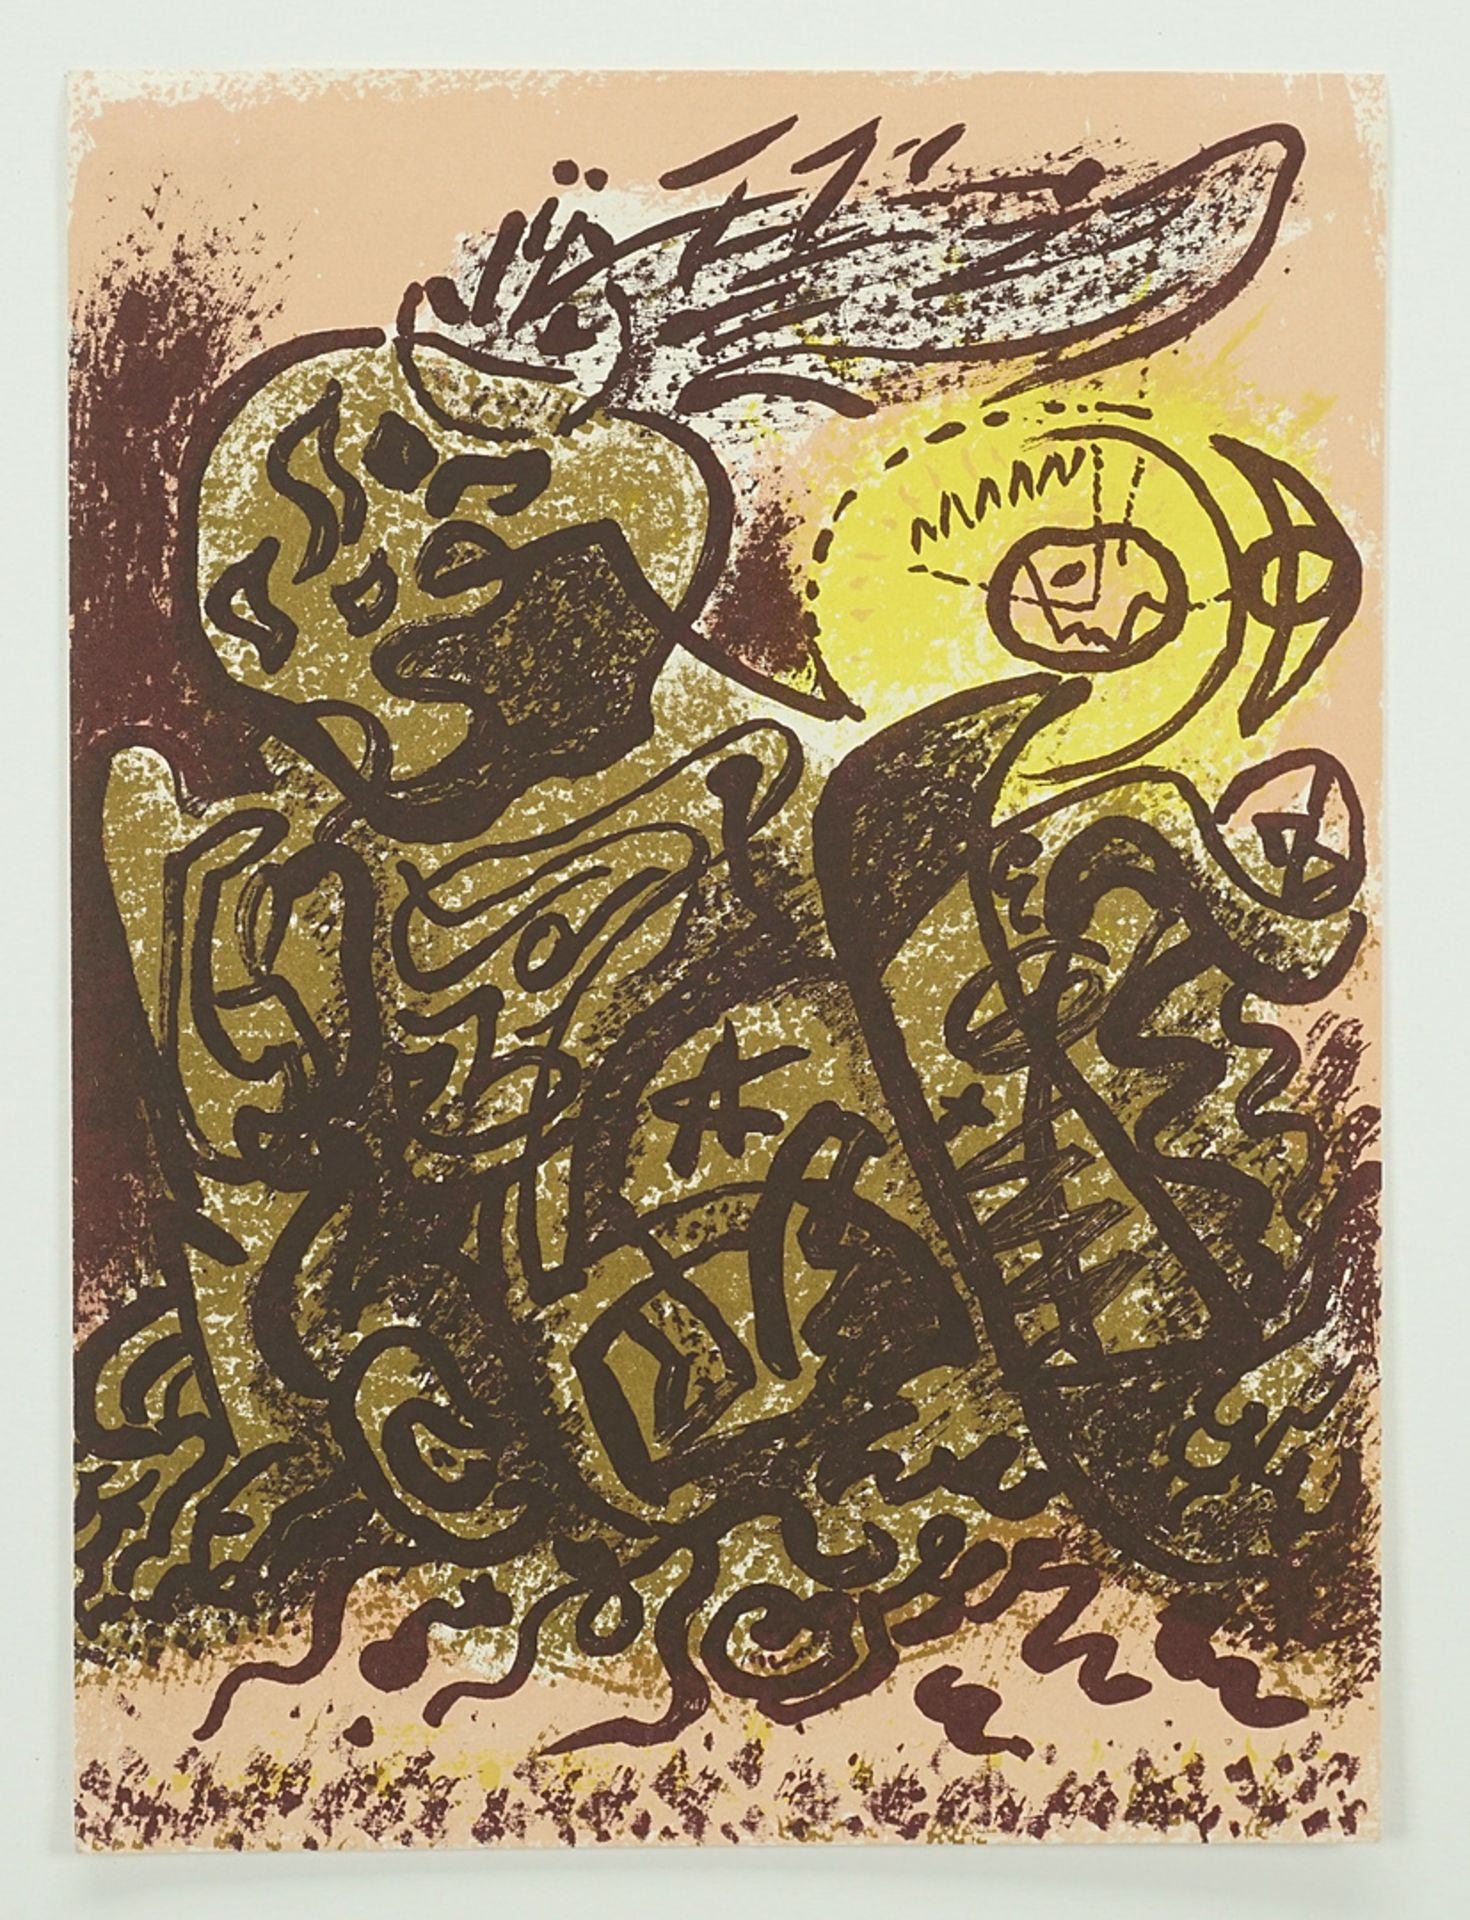 André Masson (1896-1987), "Caliban" - Image 3 of 4